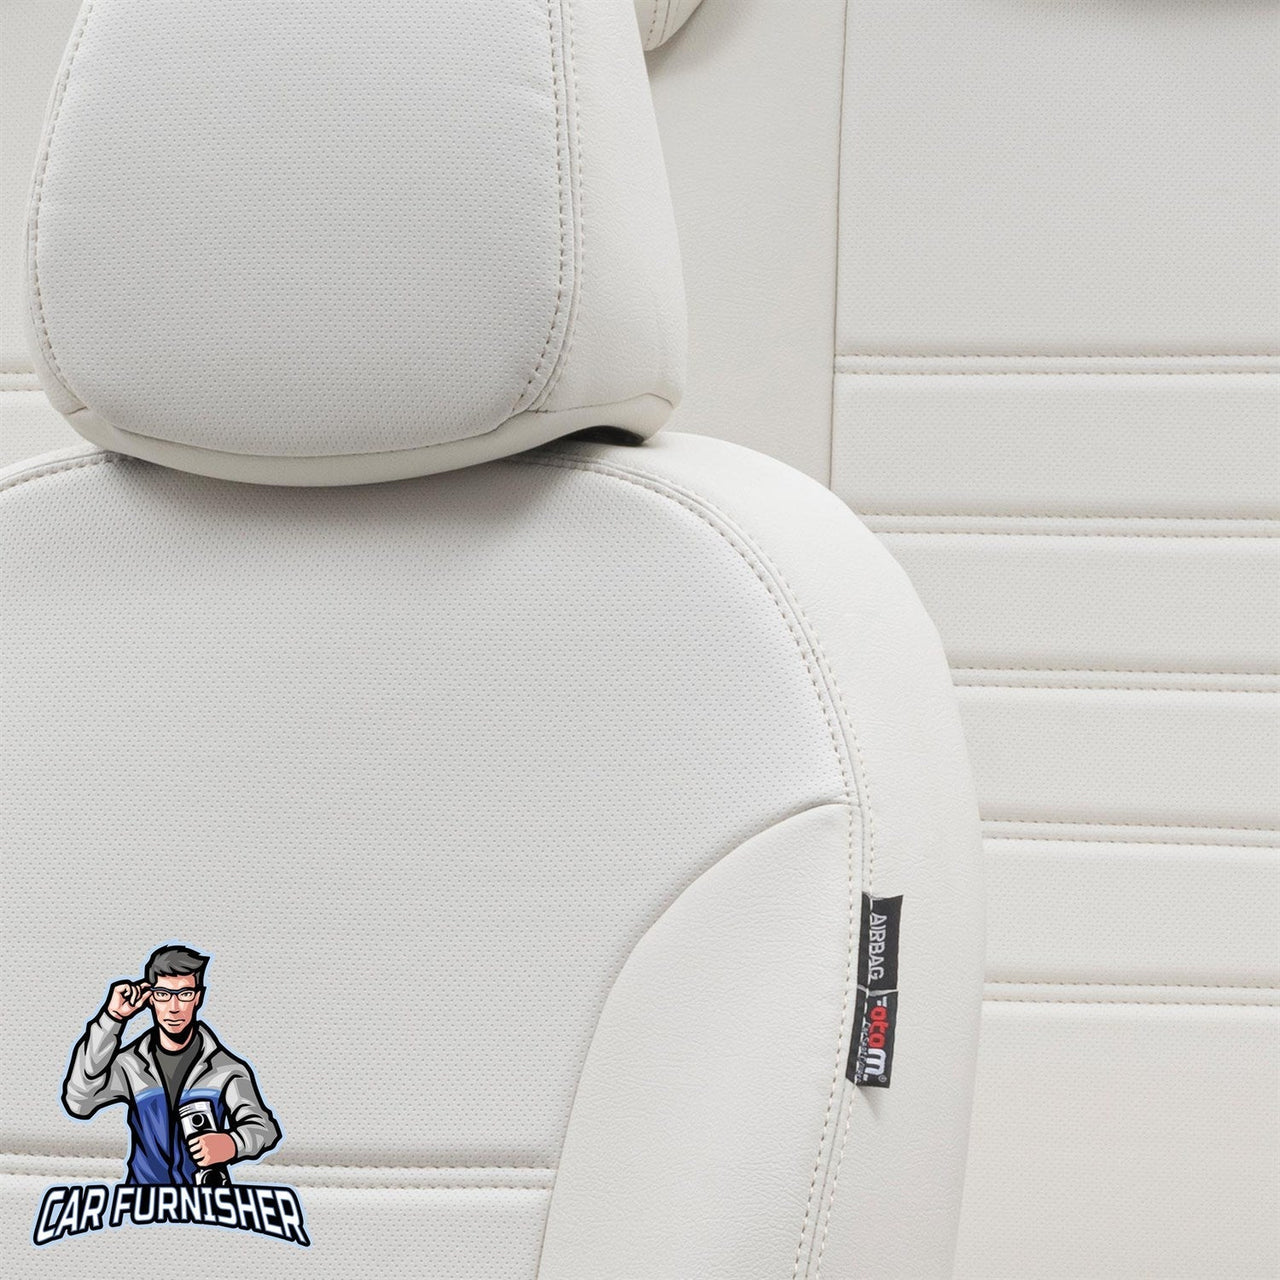 Ford Mondeo Seat Covers Istanbul Leather Design Ivory Leather